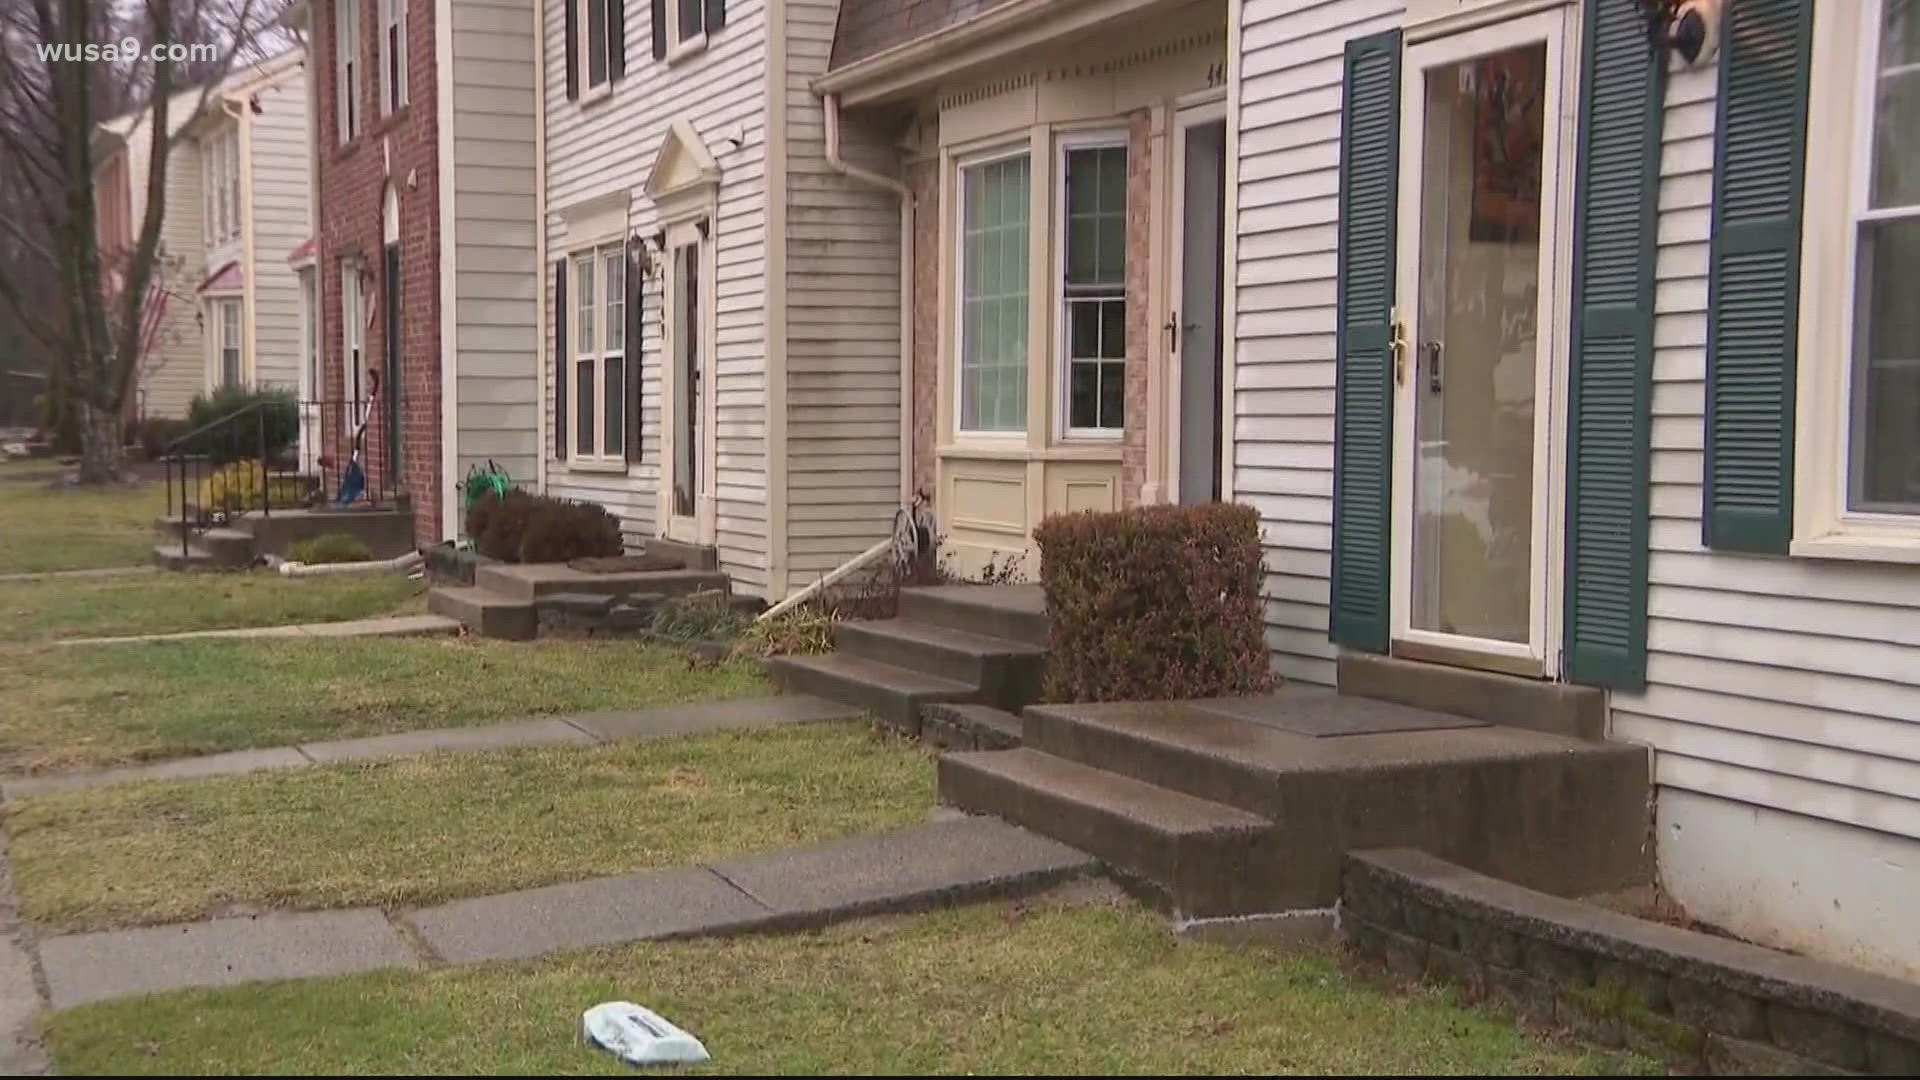 A sewer backup caused thousands of dollars of damage to homes in Fairfax County. The families in those homes are still waiting for money from the county.